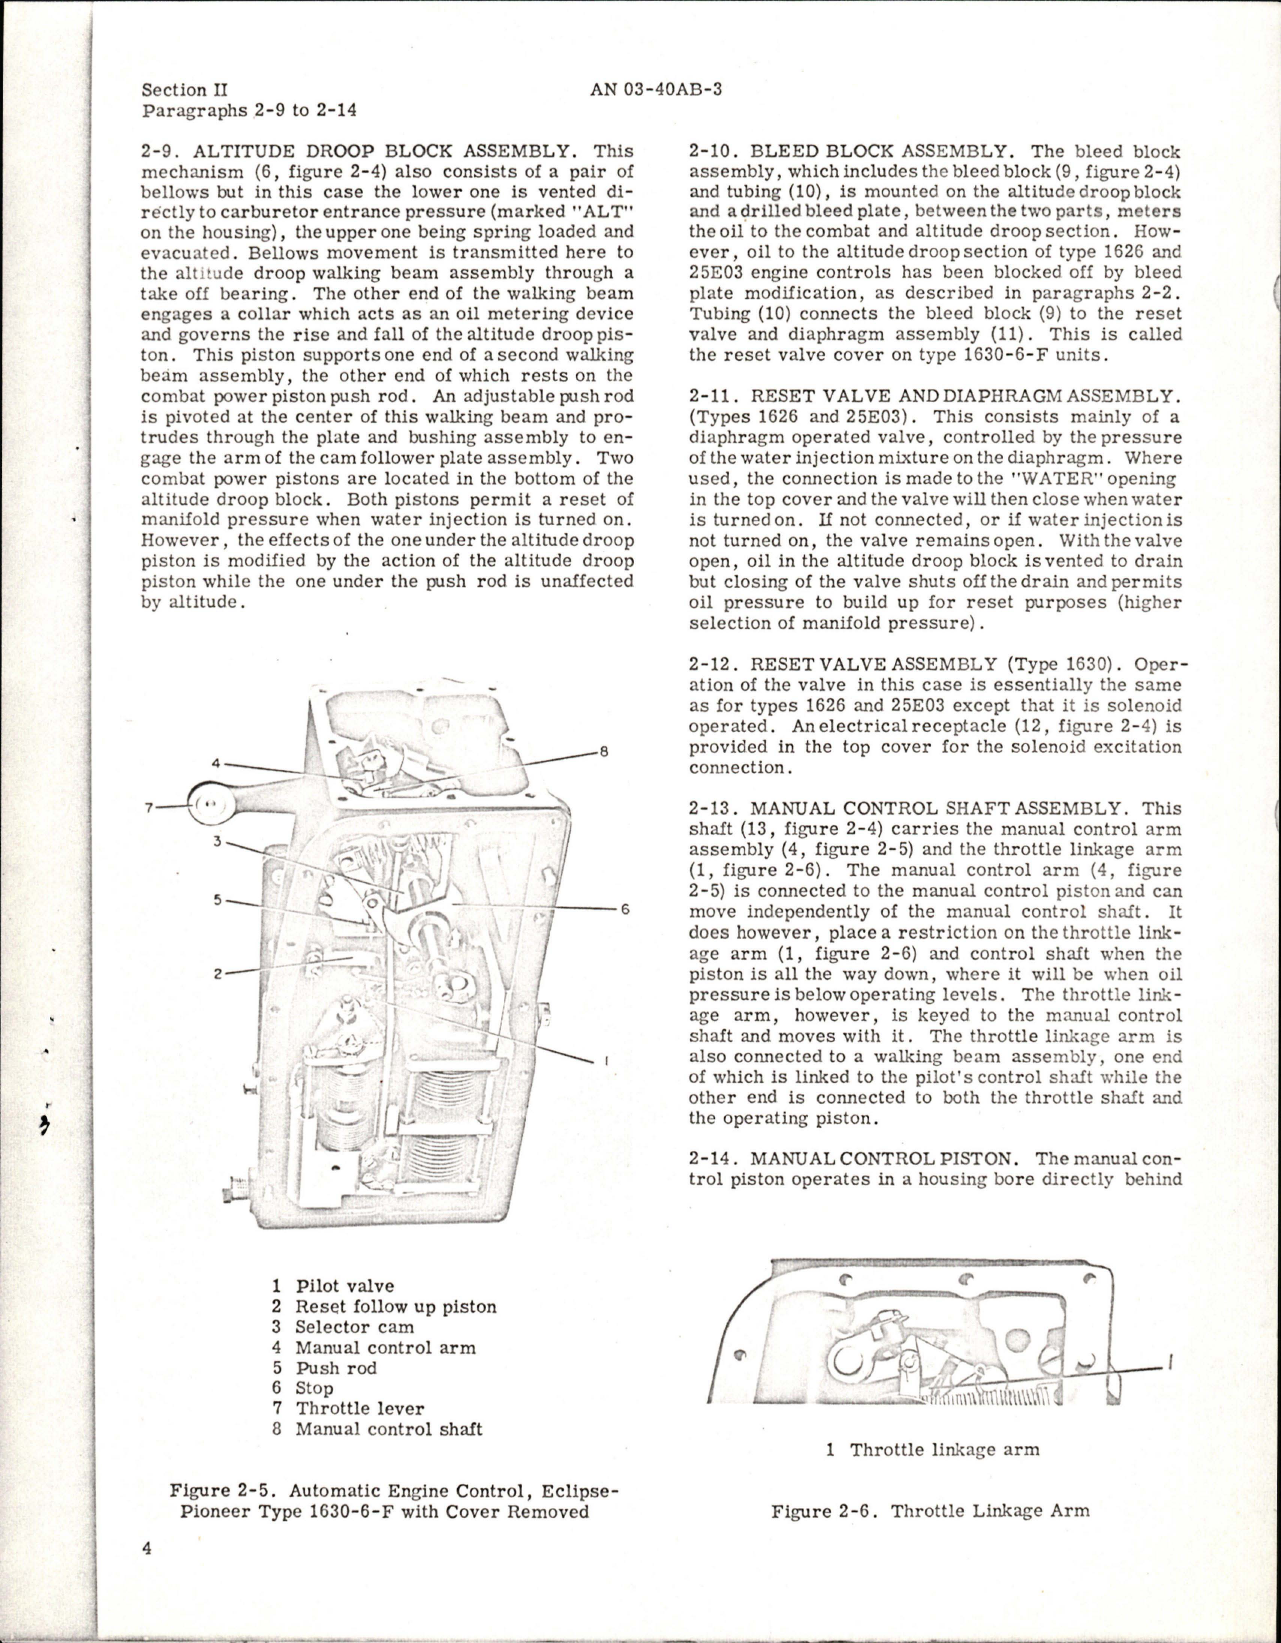 Sample page 9 from AirCorps Library document: Operation and Service Instructions for Automatic Engine Controls - Parts 1626-5-D, 1626-5-E, 1630-6-F, and 25E03-2-B